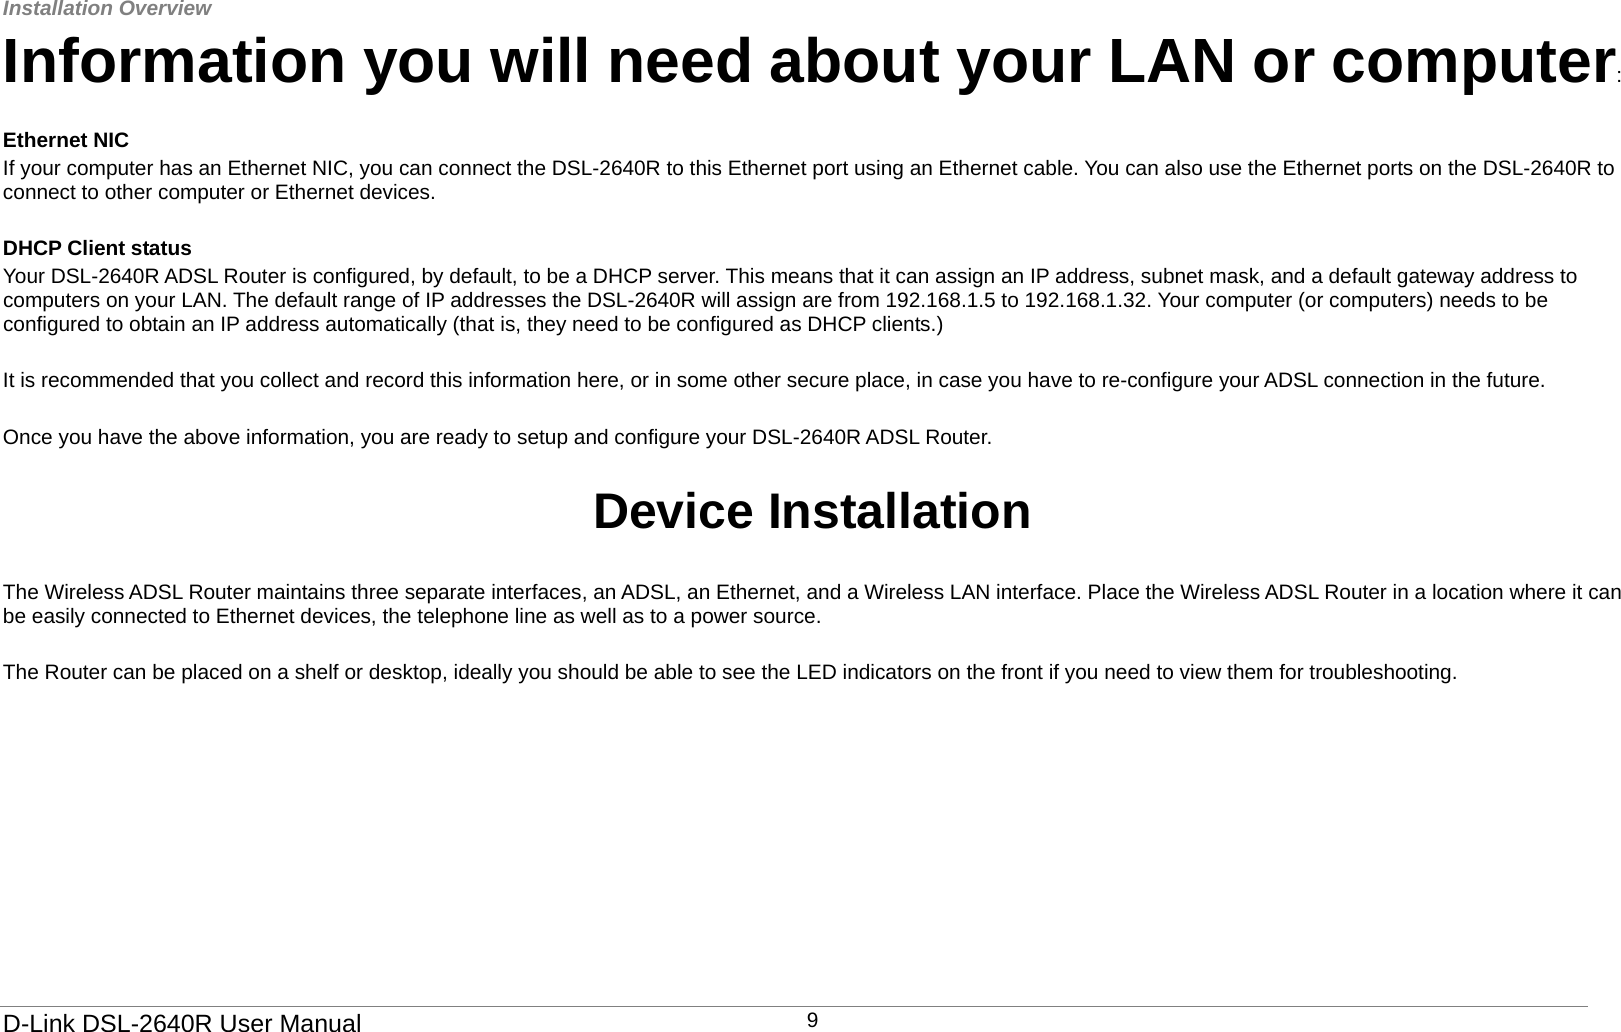 Installation Overview   D-Link DSL-2640R User Manual 9Information you will need about your LAN or computer:  Ethernet NIC If your computer has an Ethernet NIC, you can connect the DSL-2640R to this Ethernet port using an Ethernet cable. You can also use the Ethernet ports on the DSL-2640R to connect to other computer or Ethernet devices.  DHCP Client status Your DSL-2640R ADSL Router is configured, by default, to be a DHCP server. This means that it can assign an IP address, subnet mask, and a default gateway address to computers on your LAN. The default range of IP addresses the DSL-2640R will assign are from 192.168.1.5 to 192.168.1.32. Your computer (or computers) needs to be configured to obtain an IP address automatically (that is, they need to be configured as DHCP clients.)     It is recommended that you collect and record this information here, or in some other secure place, in case you have to re-configure your ADSL connection in the future.  Once you have the above information, you are ready to setup and configure your DSL-2640R ADSL Router.  Device Installation  The Wireless ADSL Router maintains three separate interfaces, an ADSL, an Ethernet, and a Wireless LAN interface. Place the Wireless ADSL Router in a location where it can be easily connected to Ethernet devices, the telephone line as well as to a power source.  The Router can be placed on a shelf or desktop, ideally you should be able to see the LED indicators on the front if you need to view them for troubleshooting.       